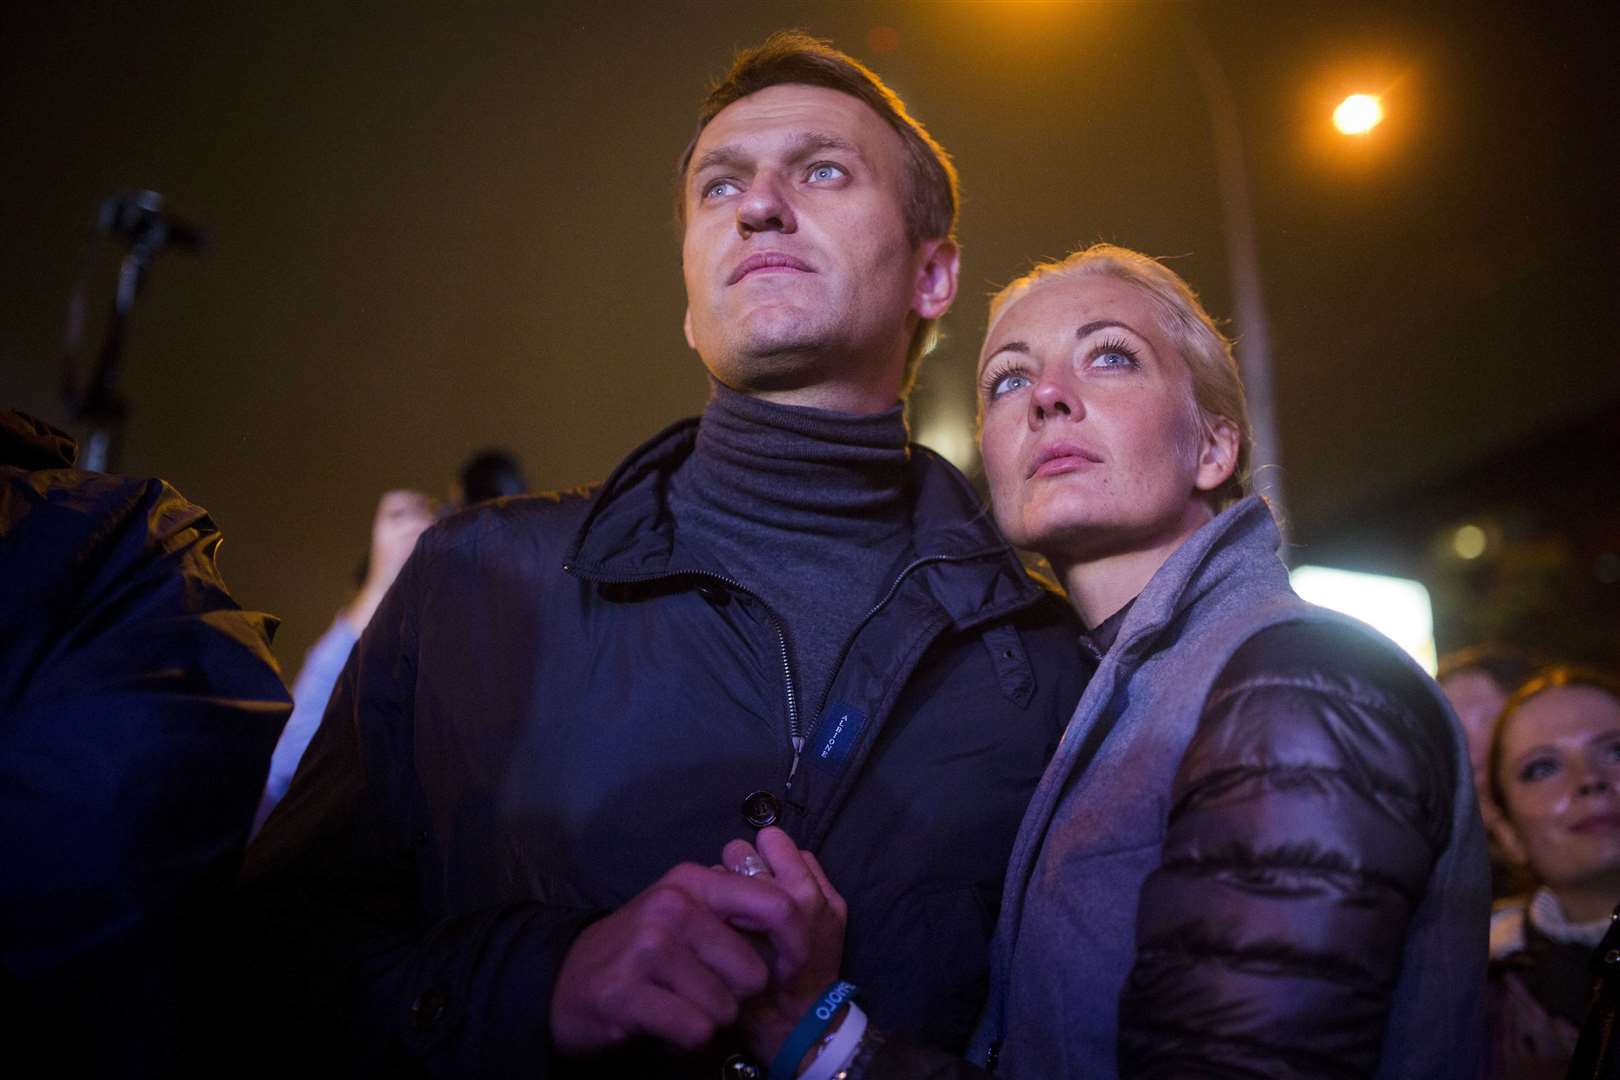 Alexei Navalny with his wife Yulia after a rally in Moscow in 2013 (Evgeny Feldman/AP)